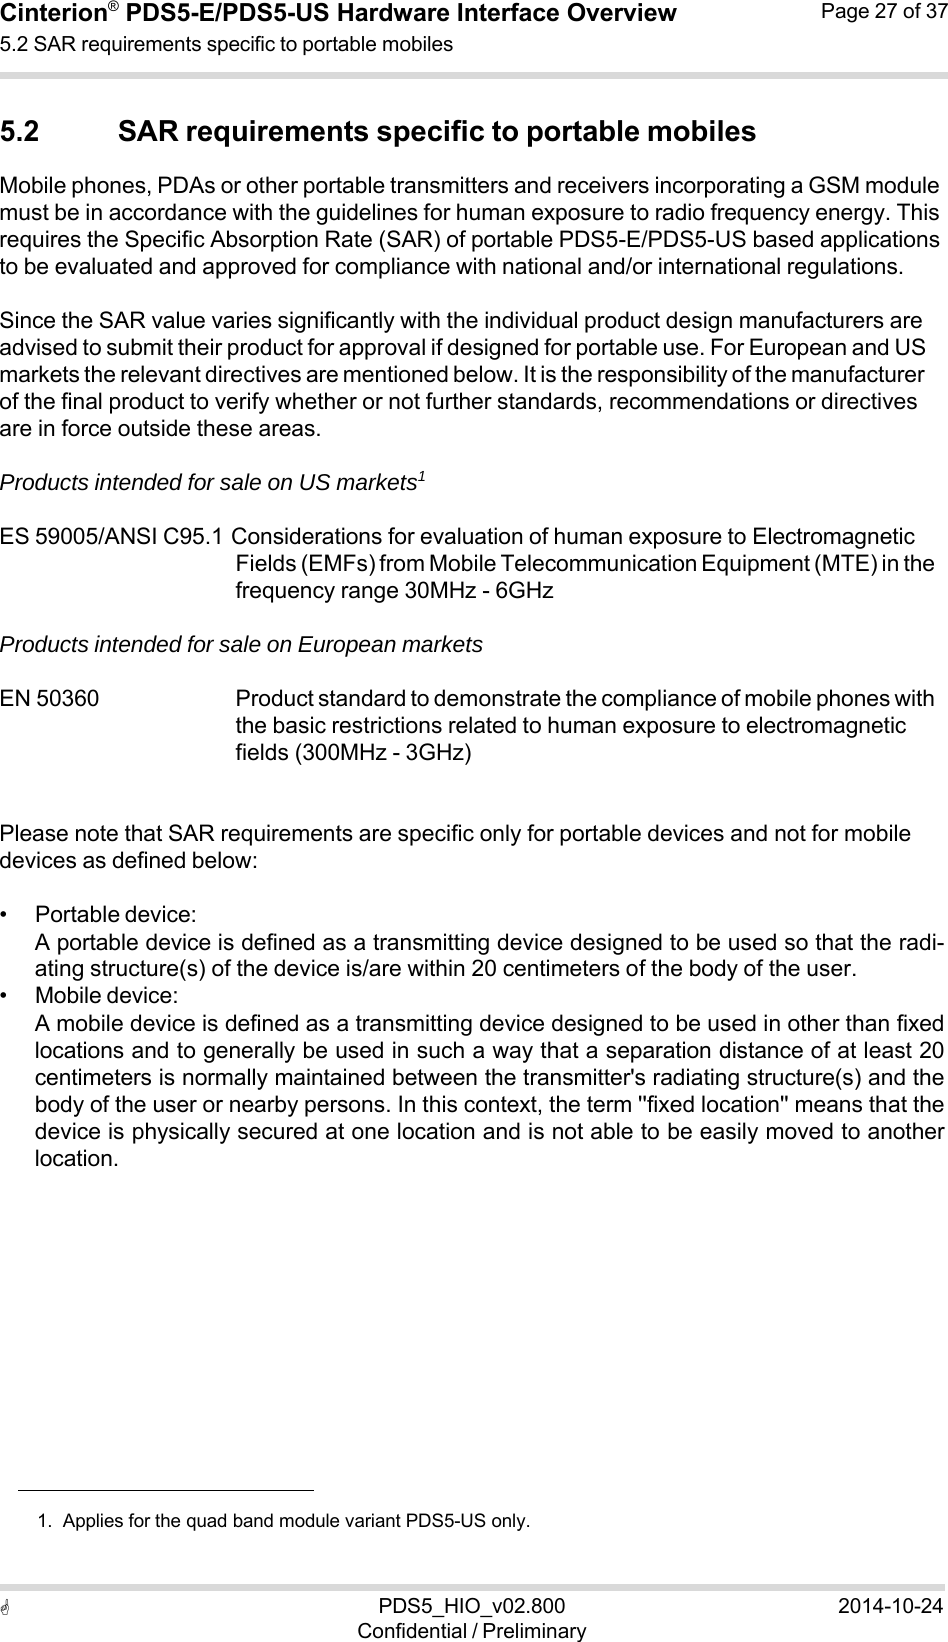  PDS5_HIO_v02.800Confidential / Preliminary2014-10-24Cinterion®  PDS5-E/PDS5-US Hardware Interface Overview5.2 SAR requirements specific to portable mobiles Page 27 of 37   5.2 SAR requirements specific to portable mobiles Mobile phones, PDAs or other portable transmitters and receivers incorporating a GSM module must be in accordance with the guidelines for human exposure to radio frequency energy. This requires the Specific Absorption Rate (SAR) of portable PDS5-E/PDS5-US based applications to be evaluated and approved for compliance with national and/or international regulations.  Since the SAR value varies significantly with the individual product design manufacturers are advised to submit their product for approval if designed for portable use. For European and US markets the relevant directives are mentioned below. It is the responsibility of the manufacturer of the final product to verify whether or not further standards, recommendations or directives are in force outside these areas.  Products intended for sale on US markets1  ES 59005/ANSI C95.1 Considerations for evaluation of human exposure to Electromagnetic Fields (EMFs) from Mobile Telecommunication Equipment (MTE) in the frequency range 30MHz - 6GHz  Products intended for sale on European markets  EN 50360   Product standard to demonstrate the compliance of mobile phones with the basic restrictions related to human exposure to electromagnetic fields (300MHz - 3GHz)   Please note that SAR requirements are specific only for portable devices and not for mobile devices as defined below:  • Portable device: A portable device is defined as a transmitting device designed to be used so that the radi- ating structure(s) of the device is/are within 20 centimeters of the body of the user. • Mobile device: A mobile device is defined as a transmitting device designed to be used in other than fixed locations and to generally be used in such a way that a separation distance of at least 20 centimeters is normally maintained between the transmitter&apos;s radiating structure(s) and the body of the user or nearby persons. In this context, the term &apos;&apos;fixed location&apos;&apos; means that the device is physically secured at one location and is not able to be easily moved to another location.                1.  Applies for the quad band module variant PDS5-US only. 